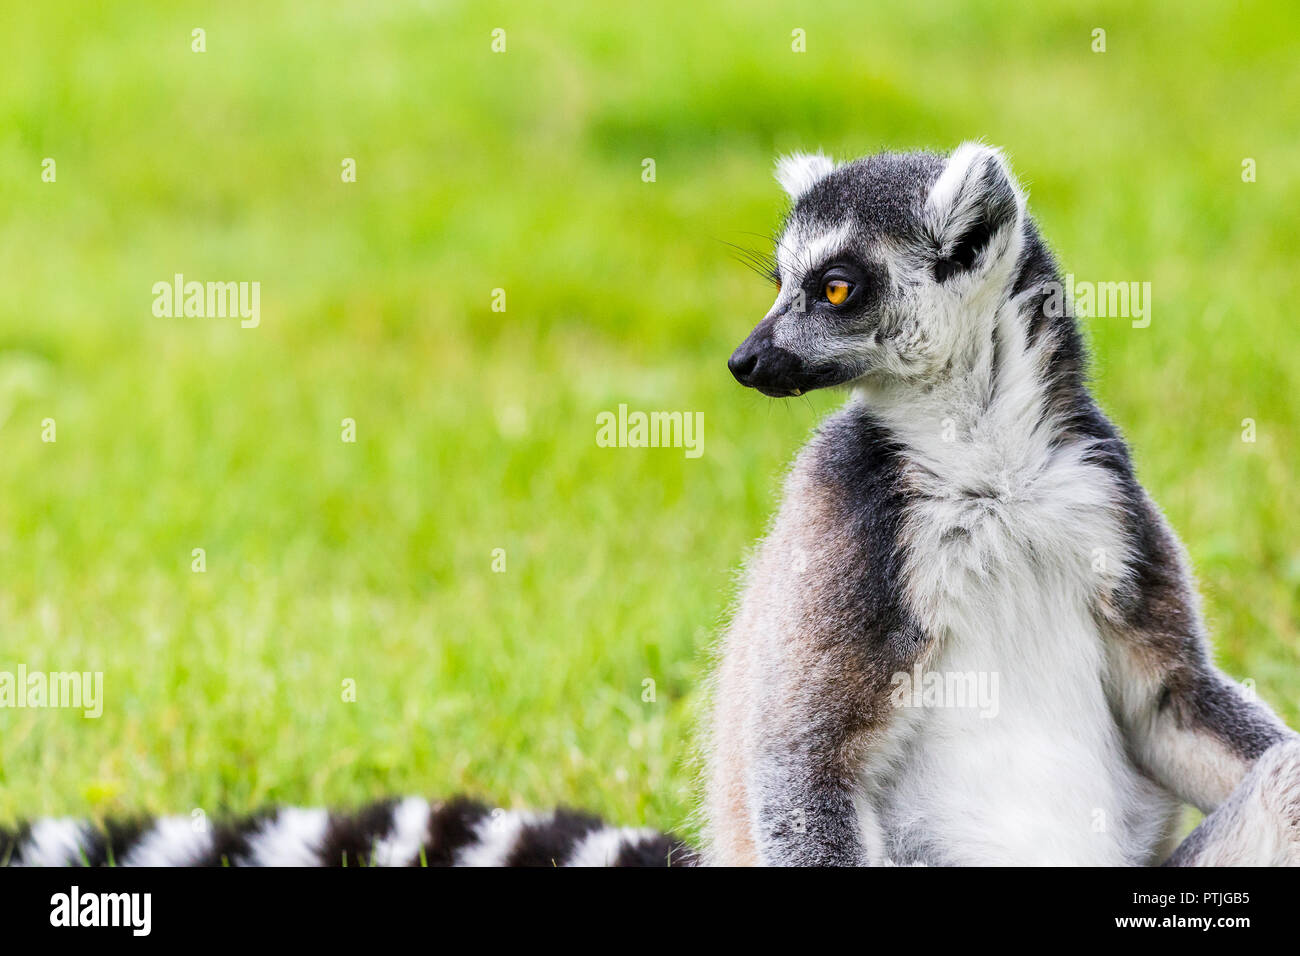 Ring tailed lemur glances back over its striped tail. Stock Photo